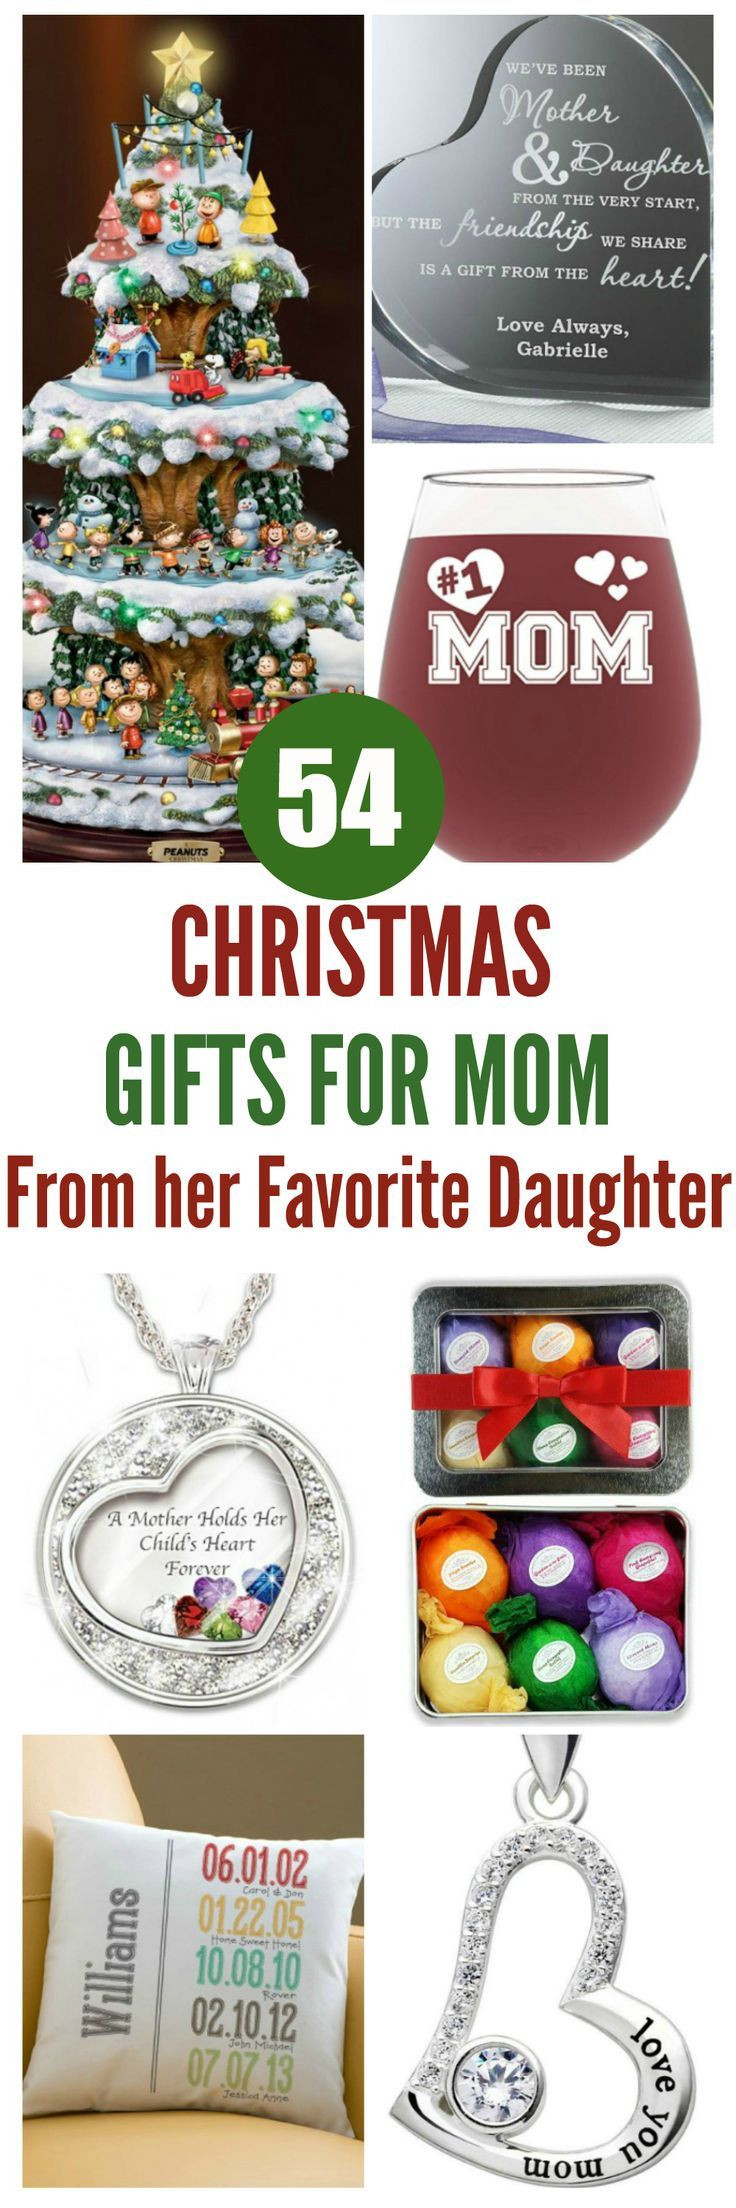 Christmas Gift Ideas For Inlaws
 225 best What to Get Your Mother in Law for Christmas